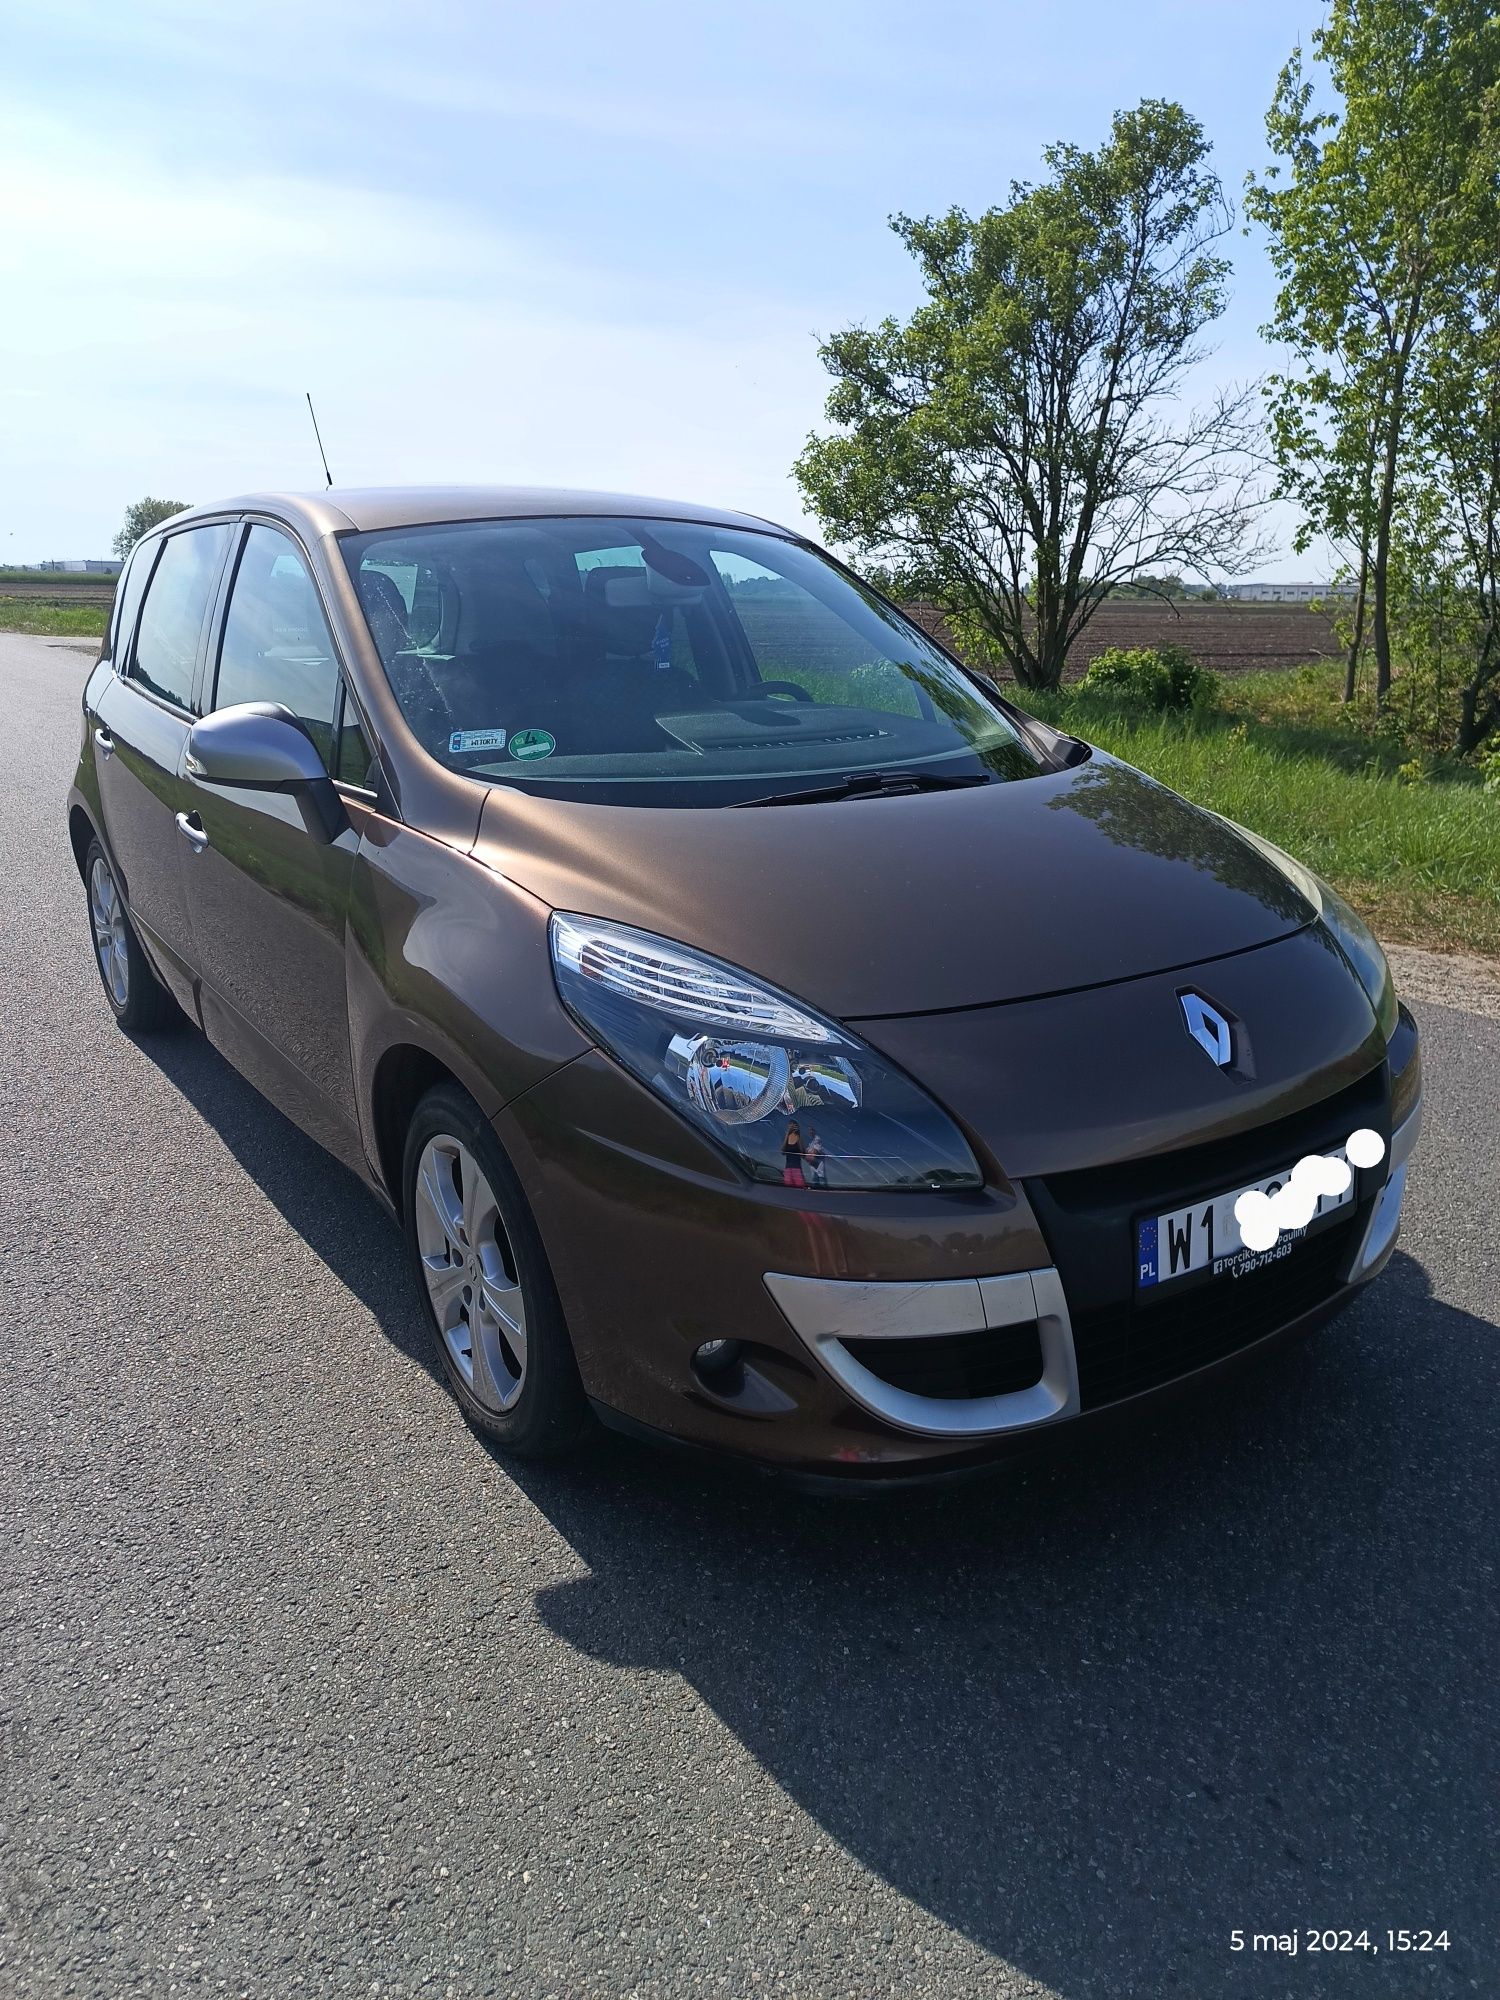 Renault Scenic 3 2010 r. 1.4 TCe o mocy 130 KM LPG